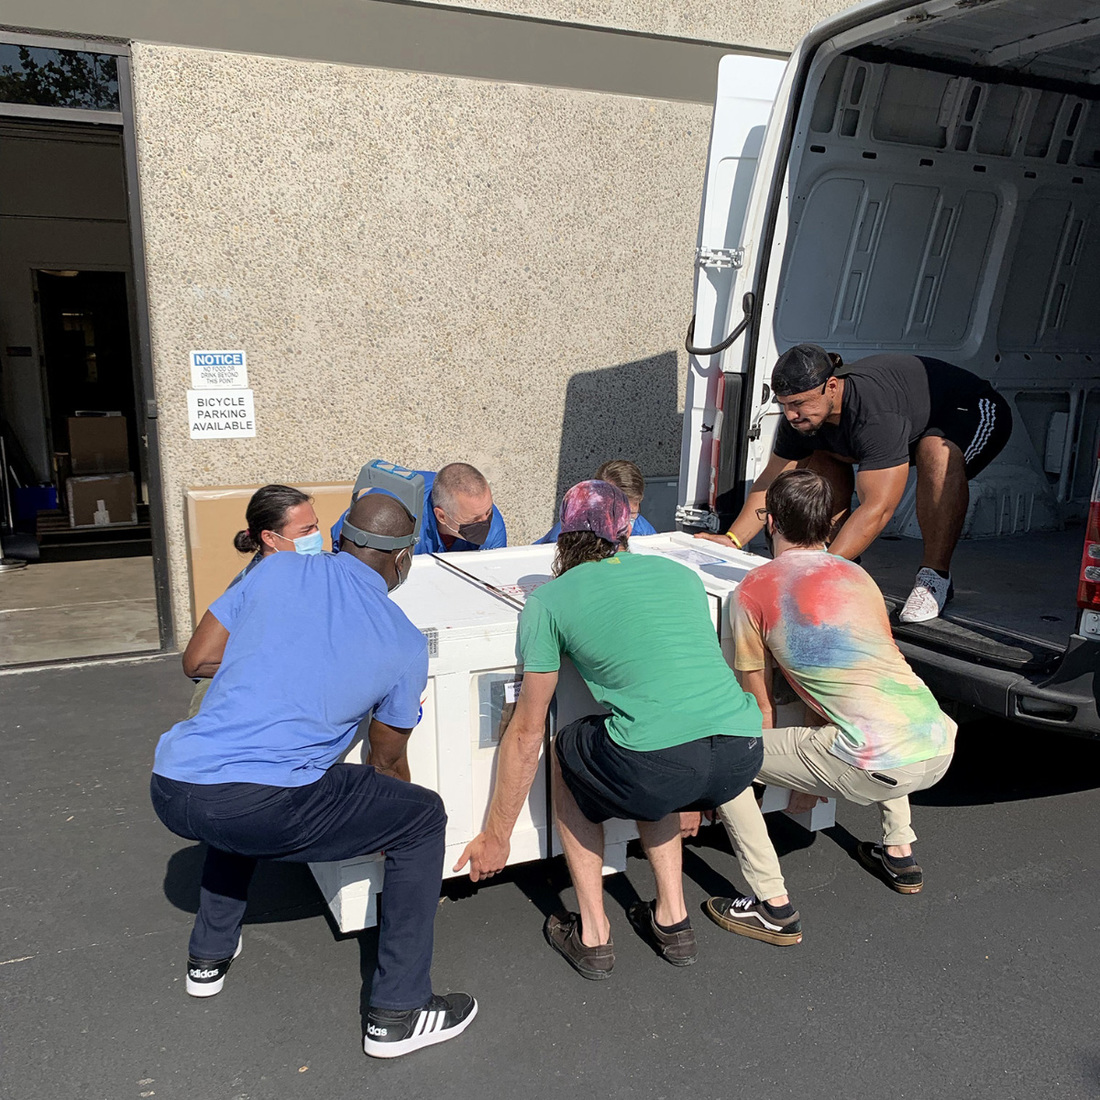 Photo of MSSS employees and the courier employee lifting the heavy container into the back of the shipping van.